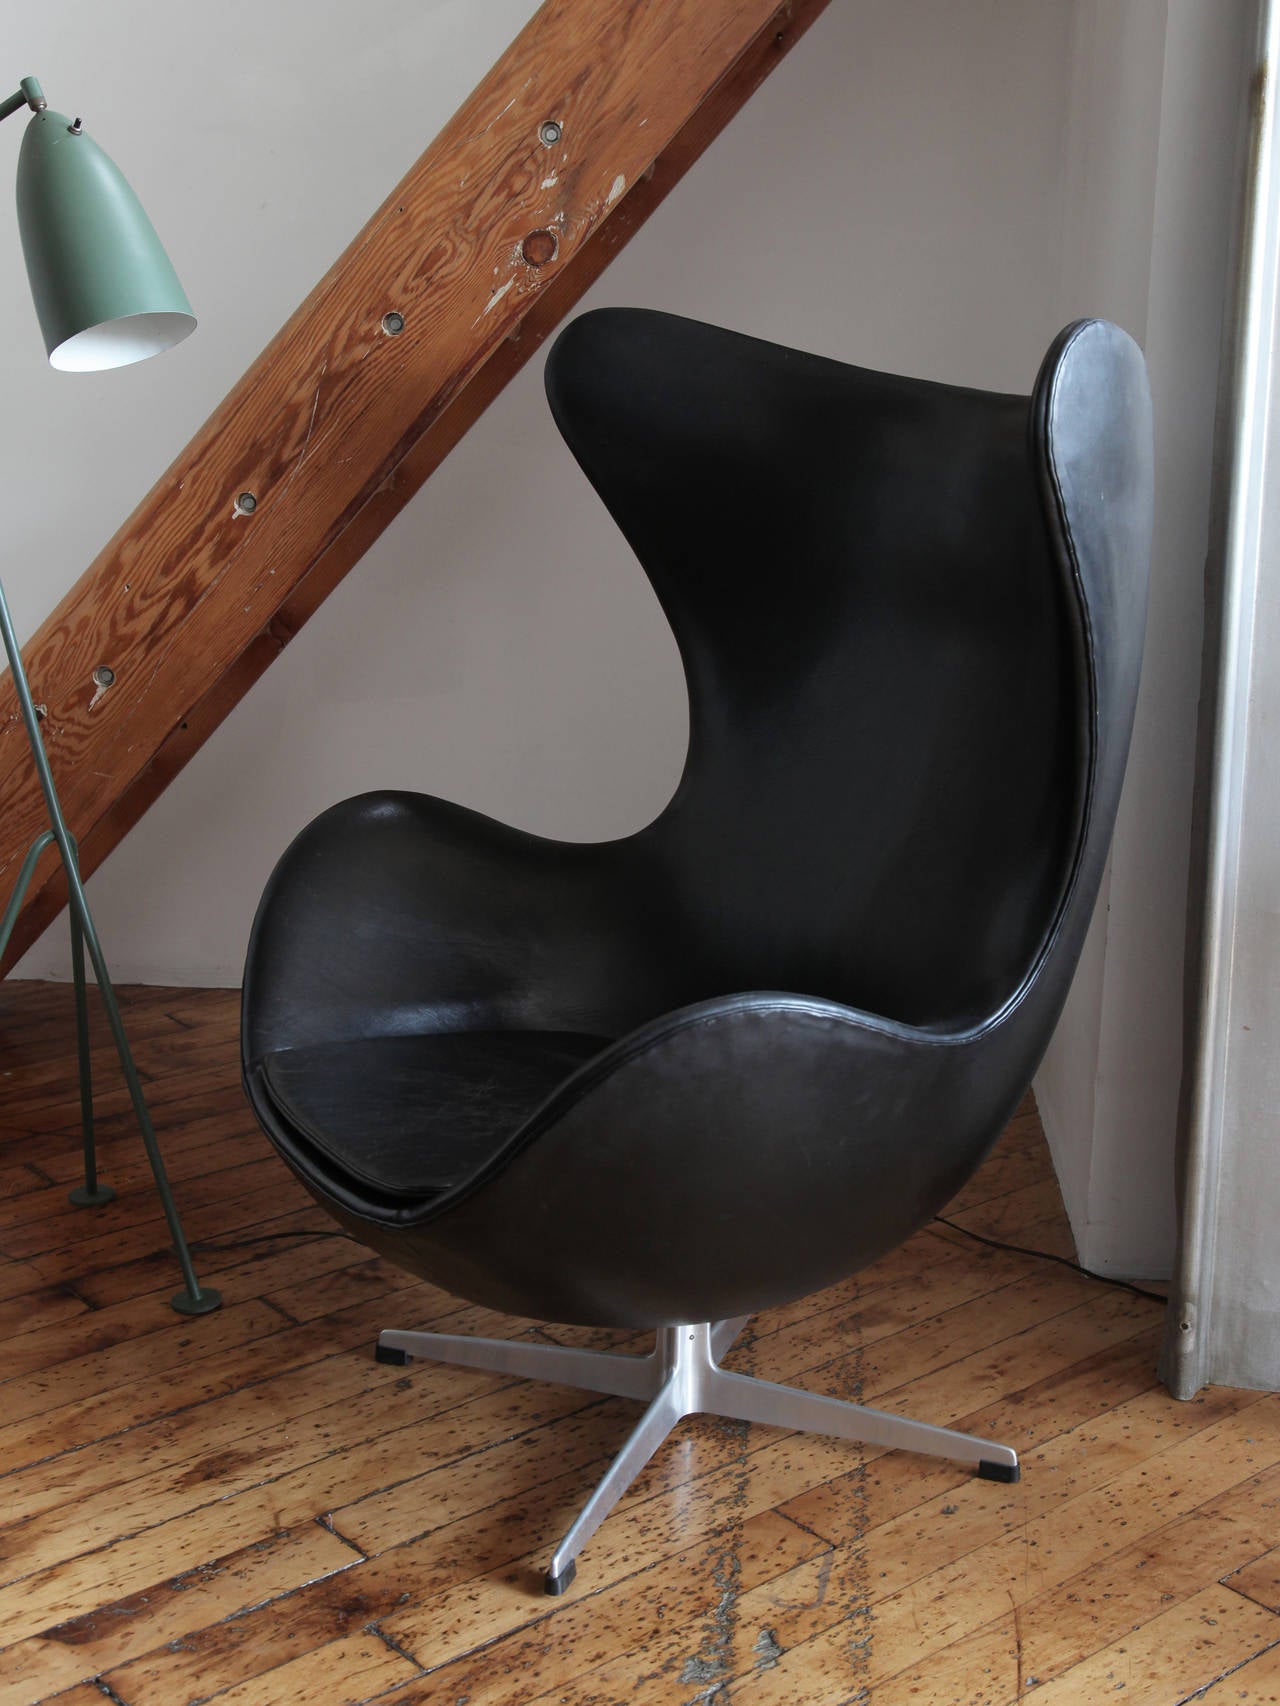 Original Egg in black leather with fluted base, designed by Arne Jacobsen in 1958 for the Radisson SAS hotel in Copenhagen, Denmark. Jacobsen, a Danish architect and designer, was inspired as a student in the 1920s by Le Corbusier, Mies van der